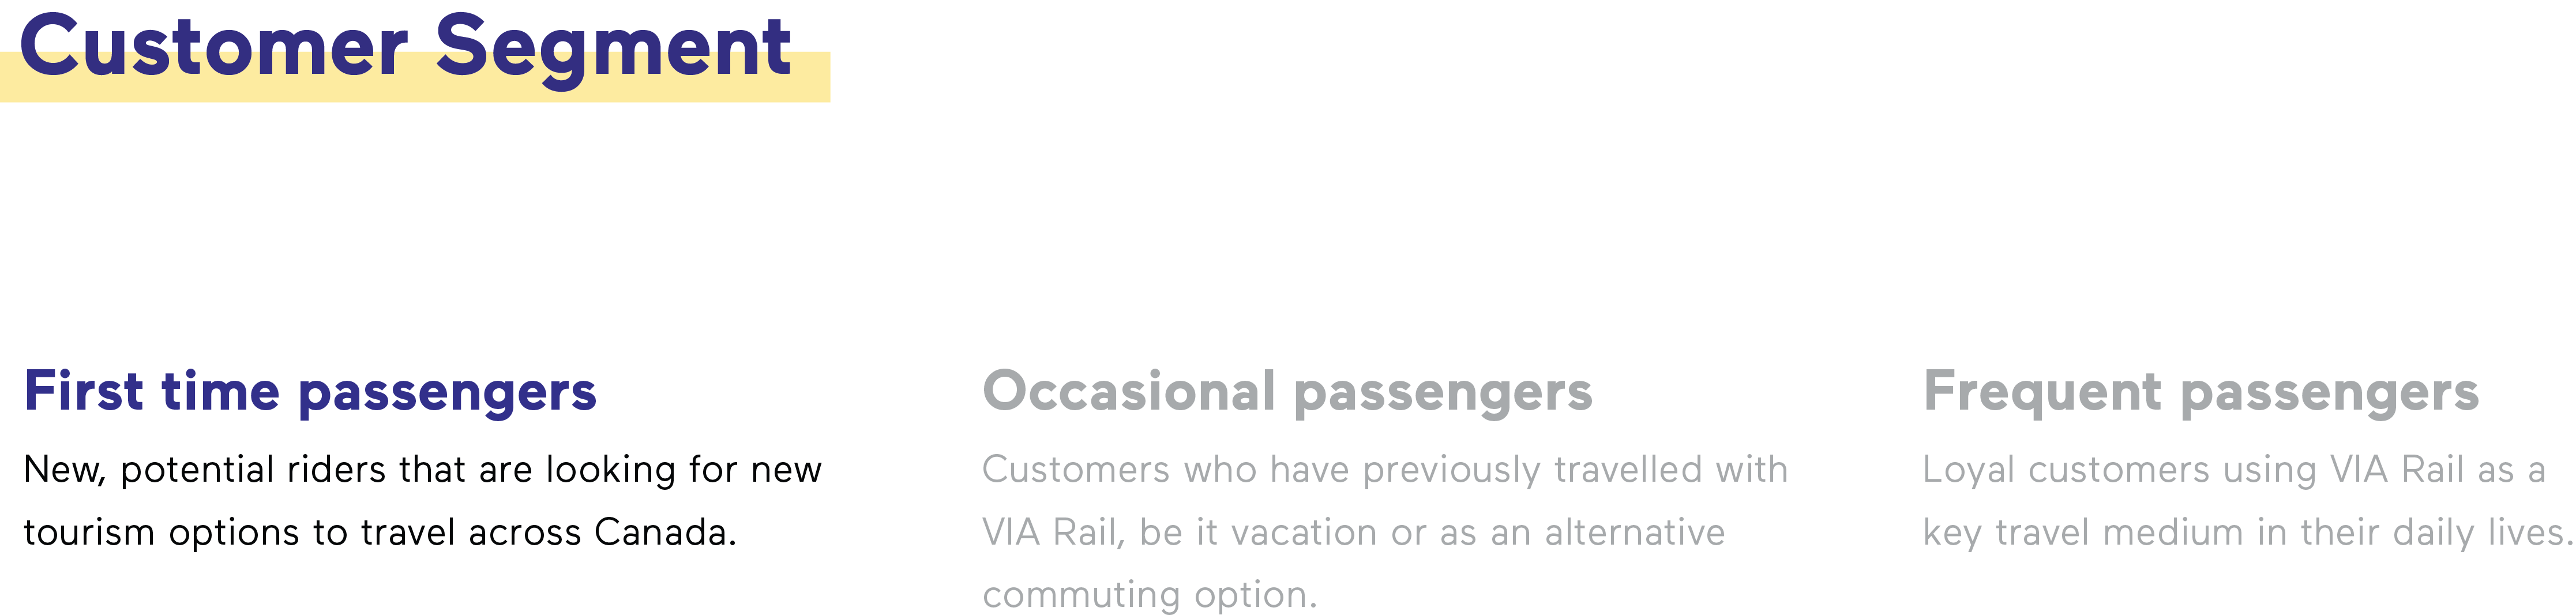 infographic of 3 types of passengers - first time, occasional, and frequent